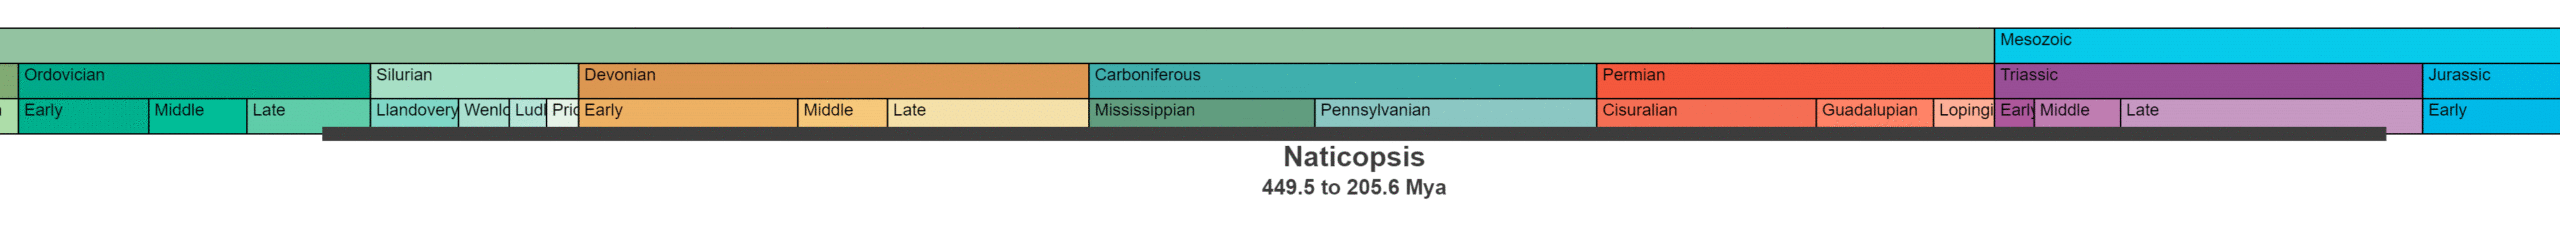 Temporal range of Naticopsis, 449.5 to 205.6 million years ago. Data sourced from Fossilworks that I suspect is incorrect.